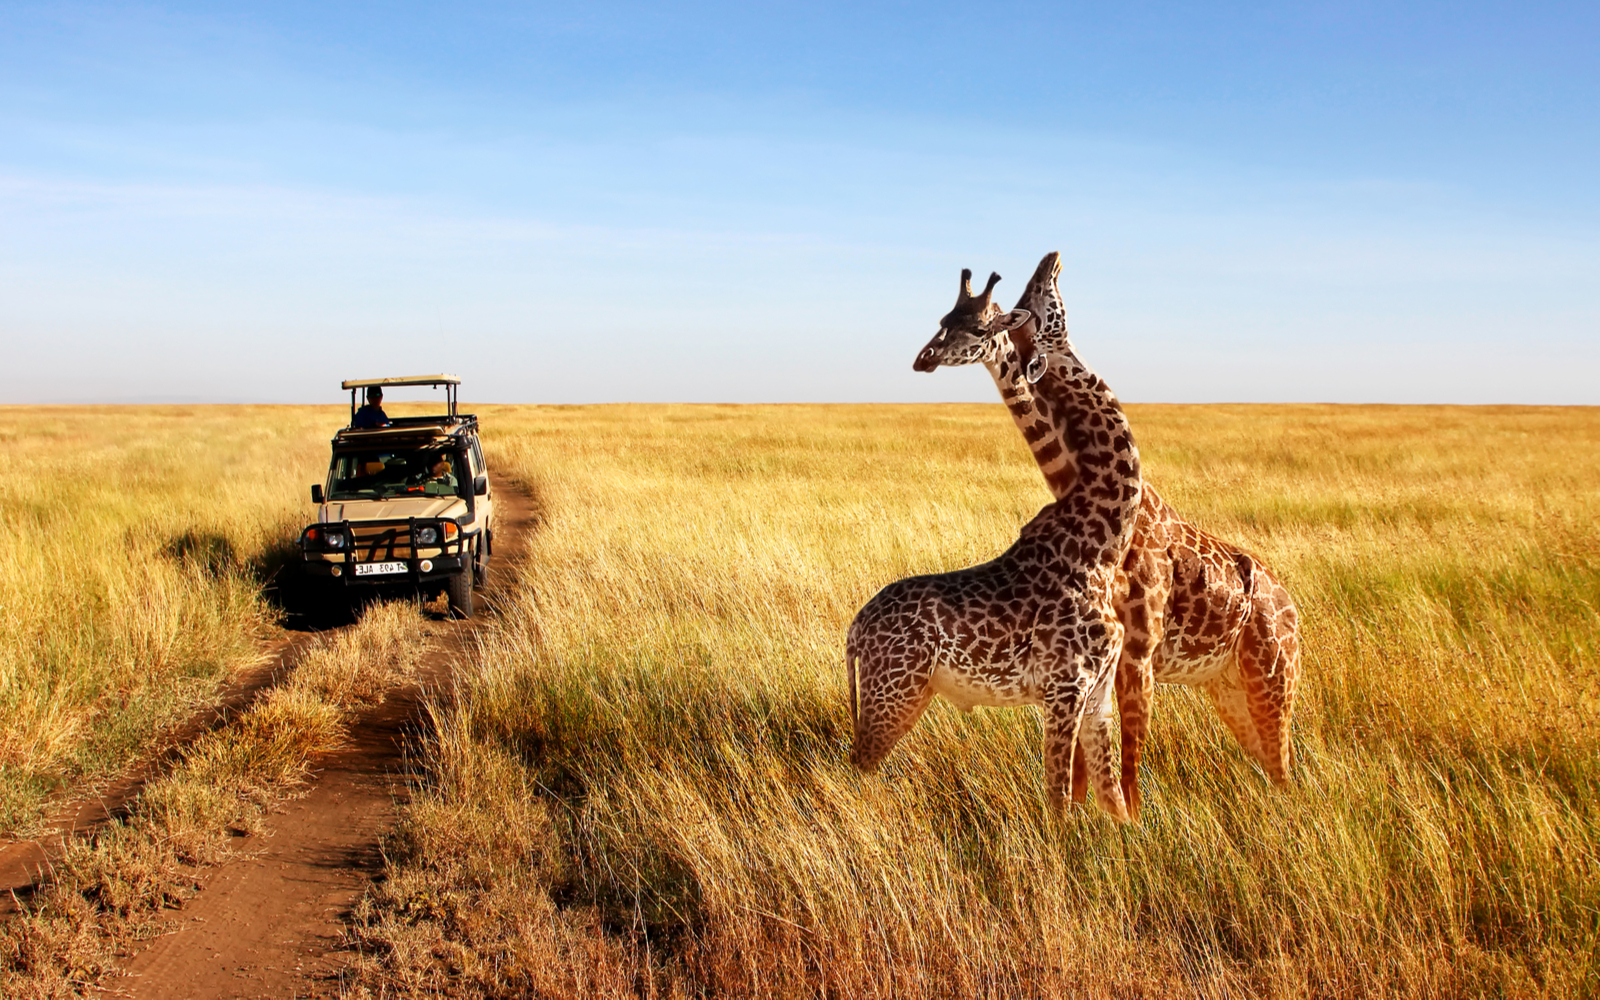 Is Tanzania Safe? | Travel Tips & Safety Concerns